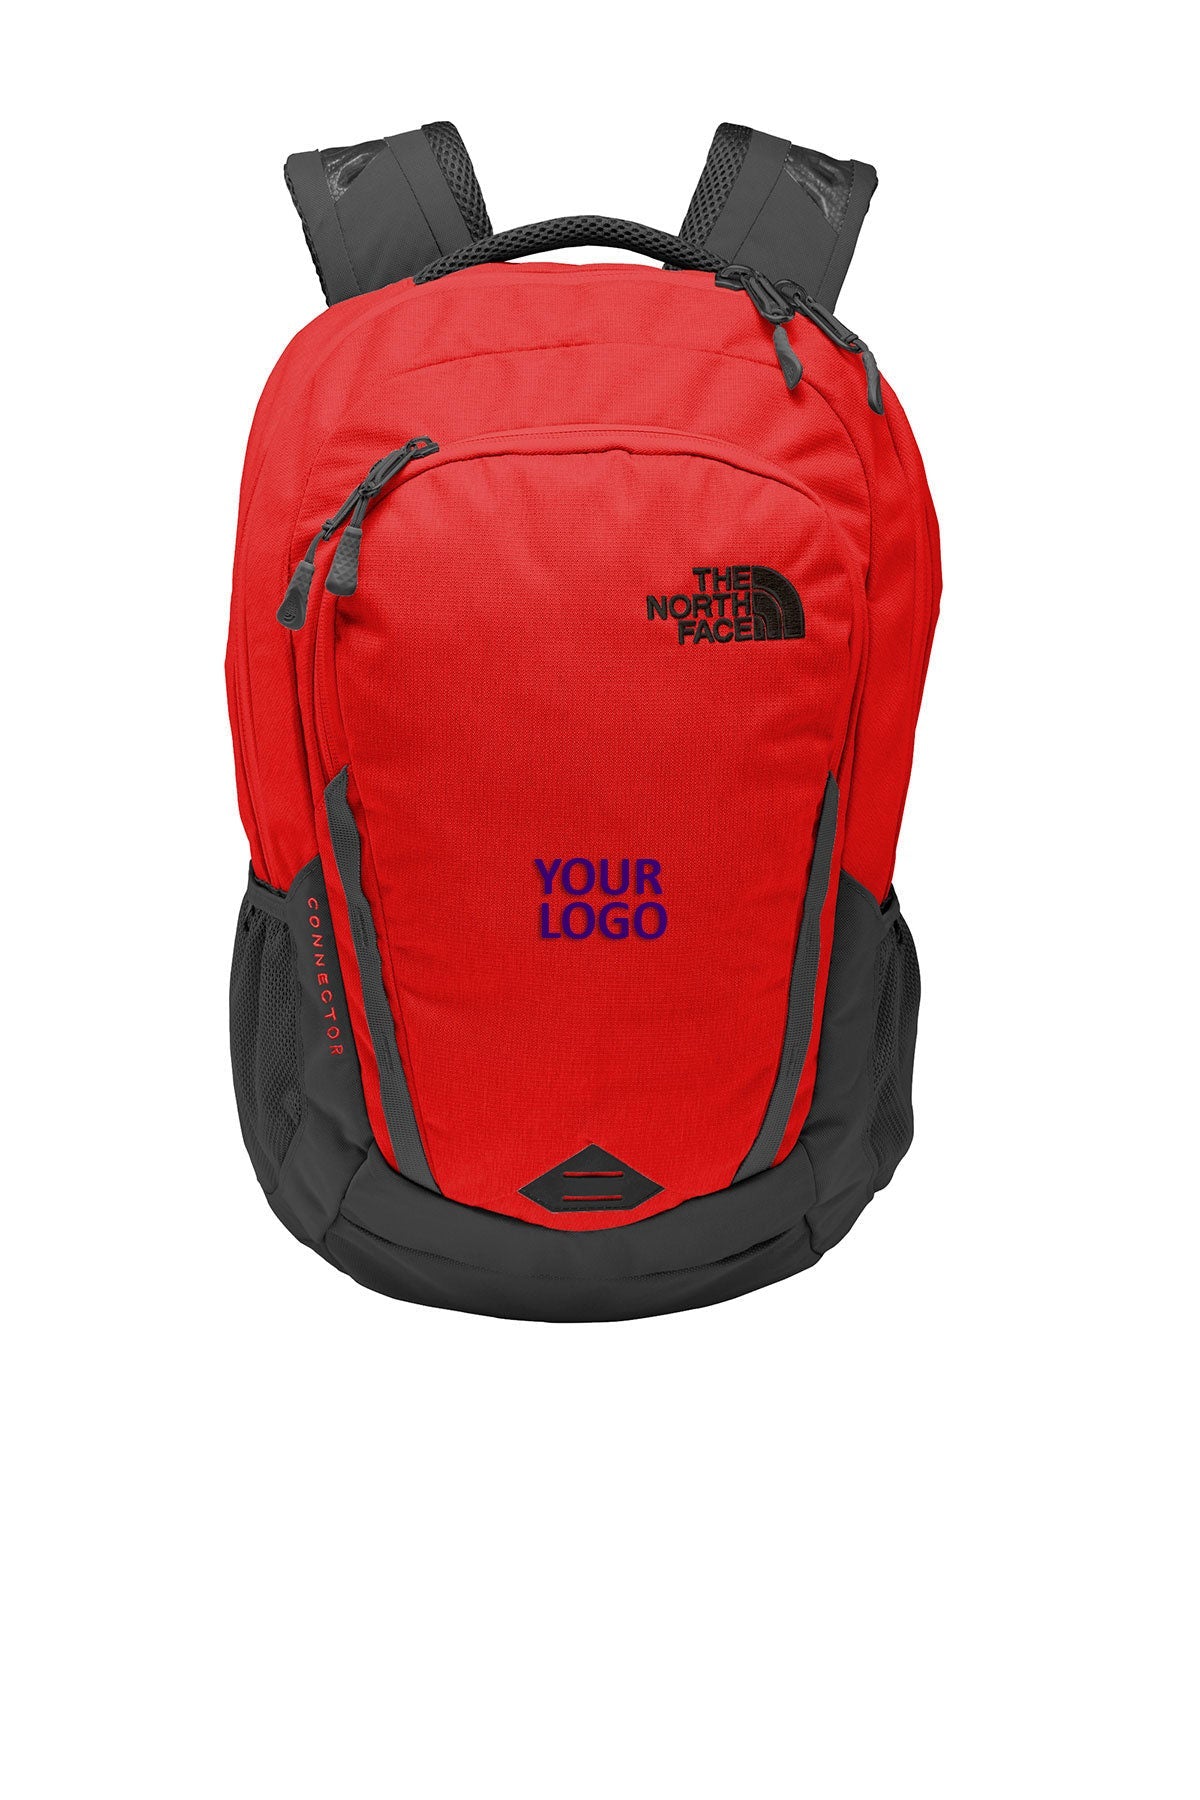 the north face connector backpack nf0a3kx8 rage red asphalt grey